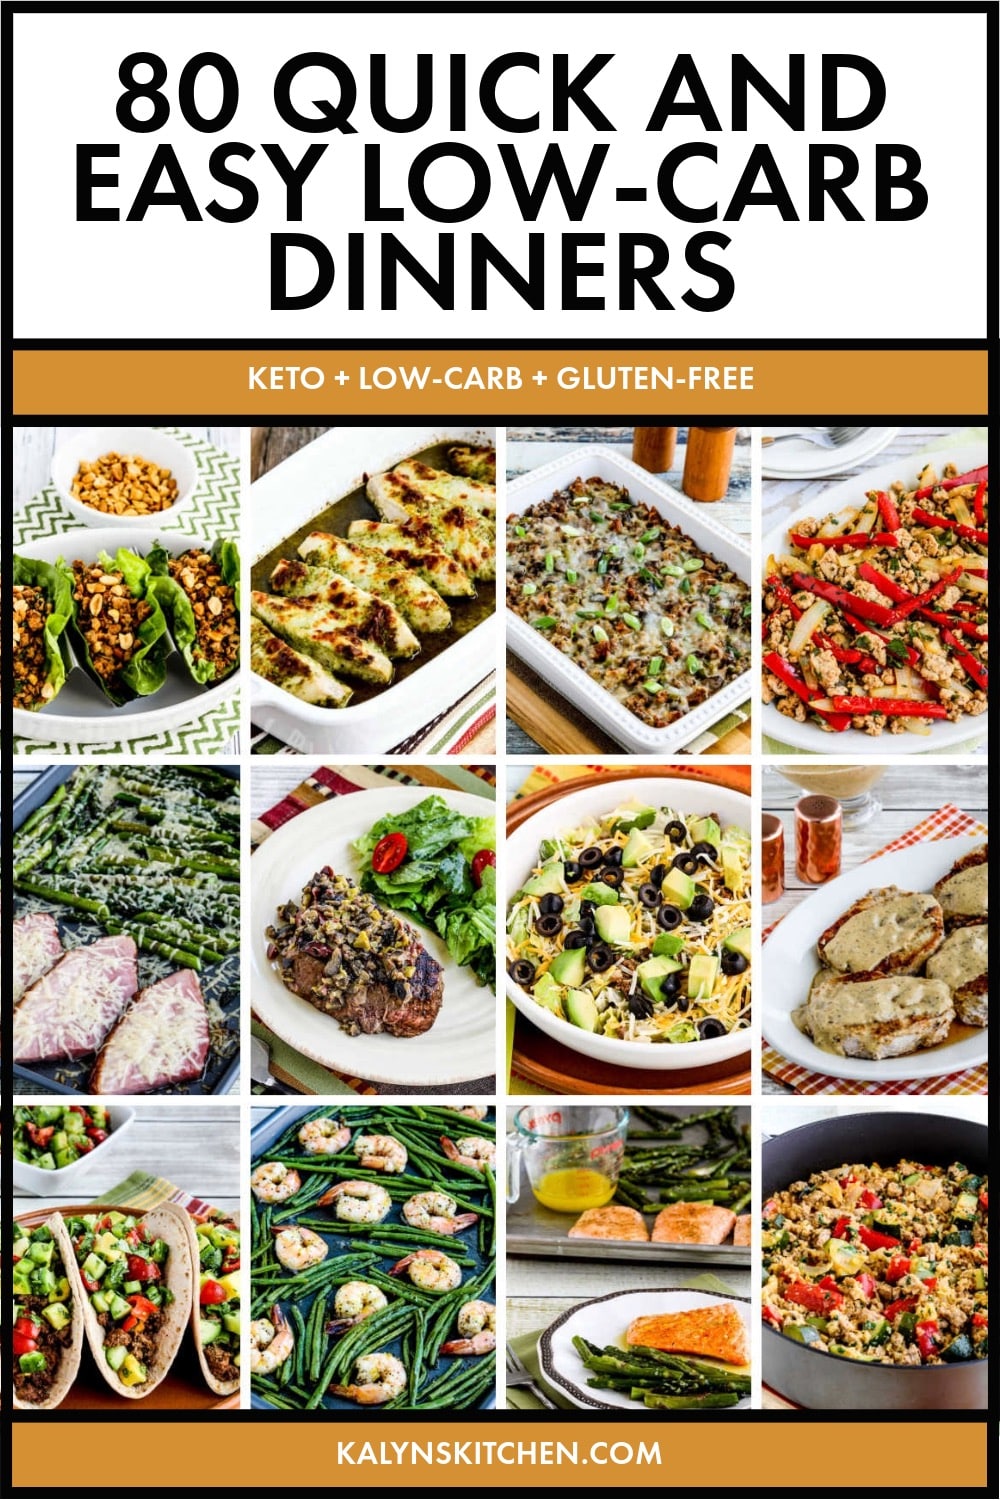 Pinterest image of 80 Quick and Easy Low-Carb Dinners